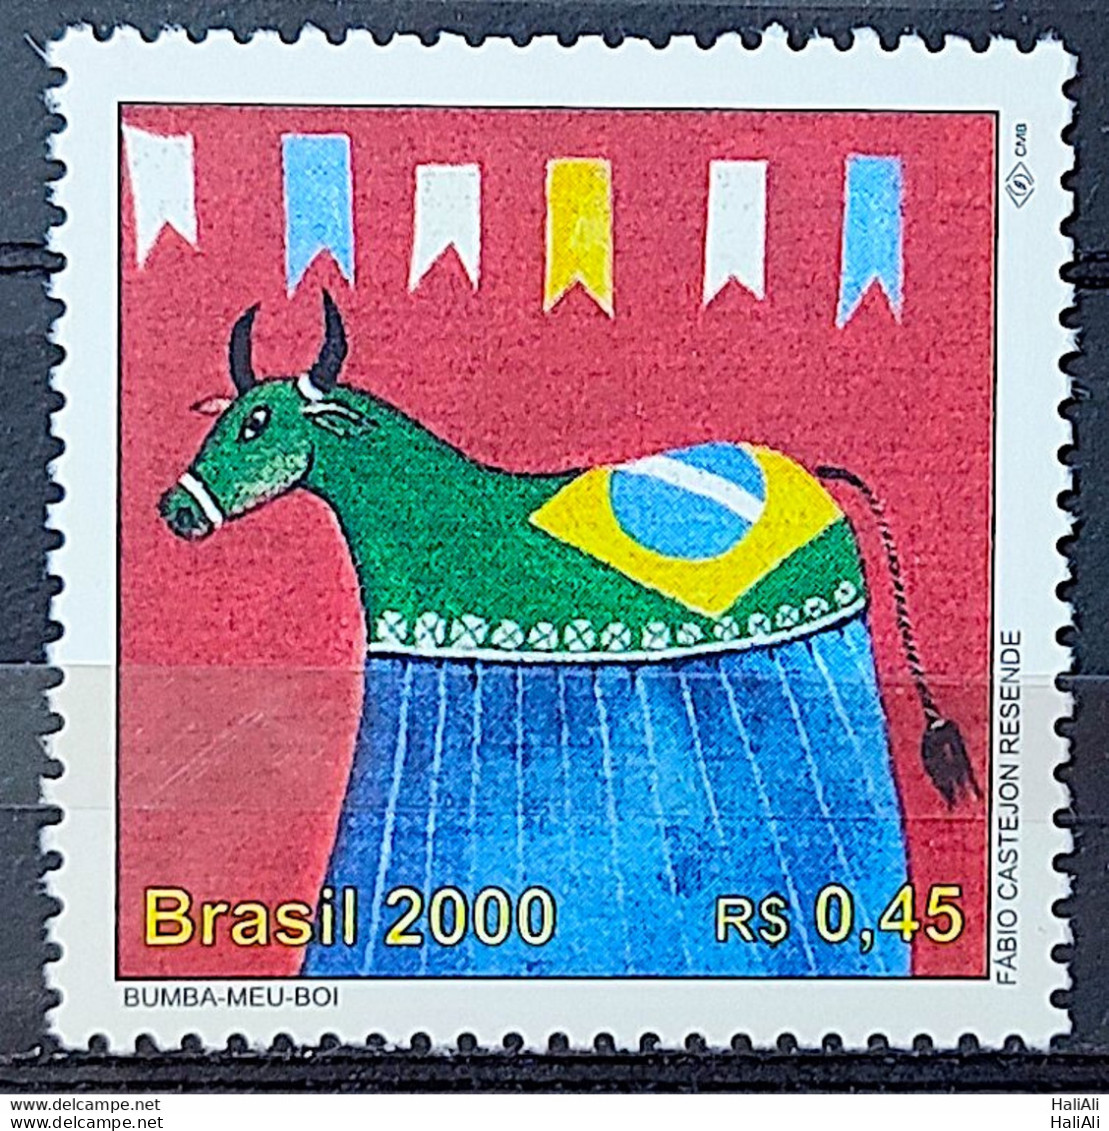 C 2271 Brazil Stamp 500 Years Discovery Of Brazil 2000 Bumba Meu Boi Flag - Unused Stamps